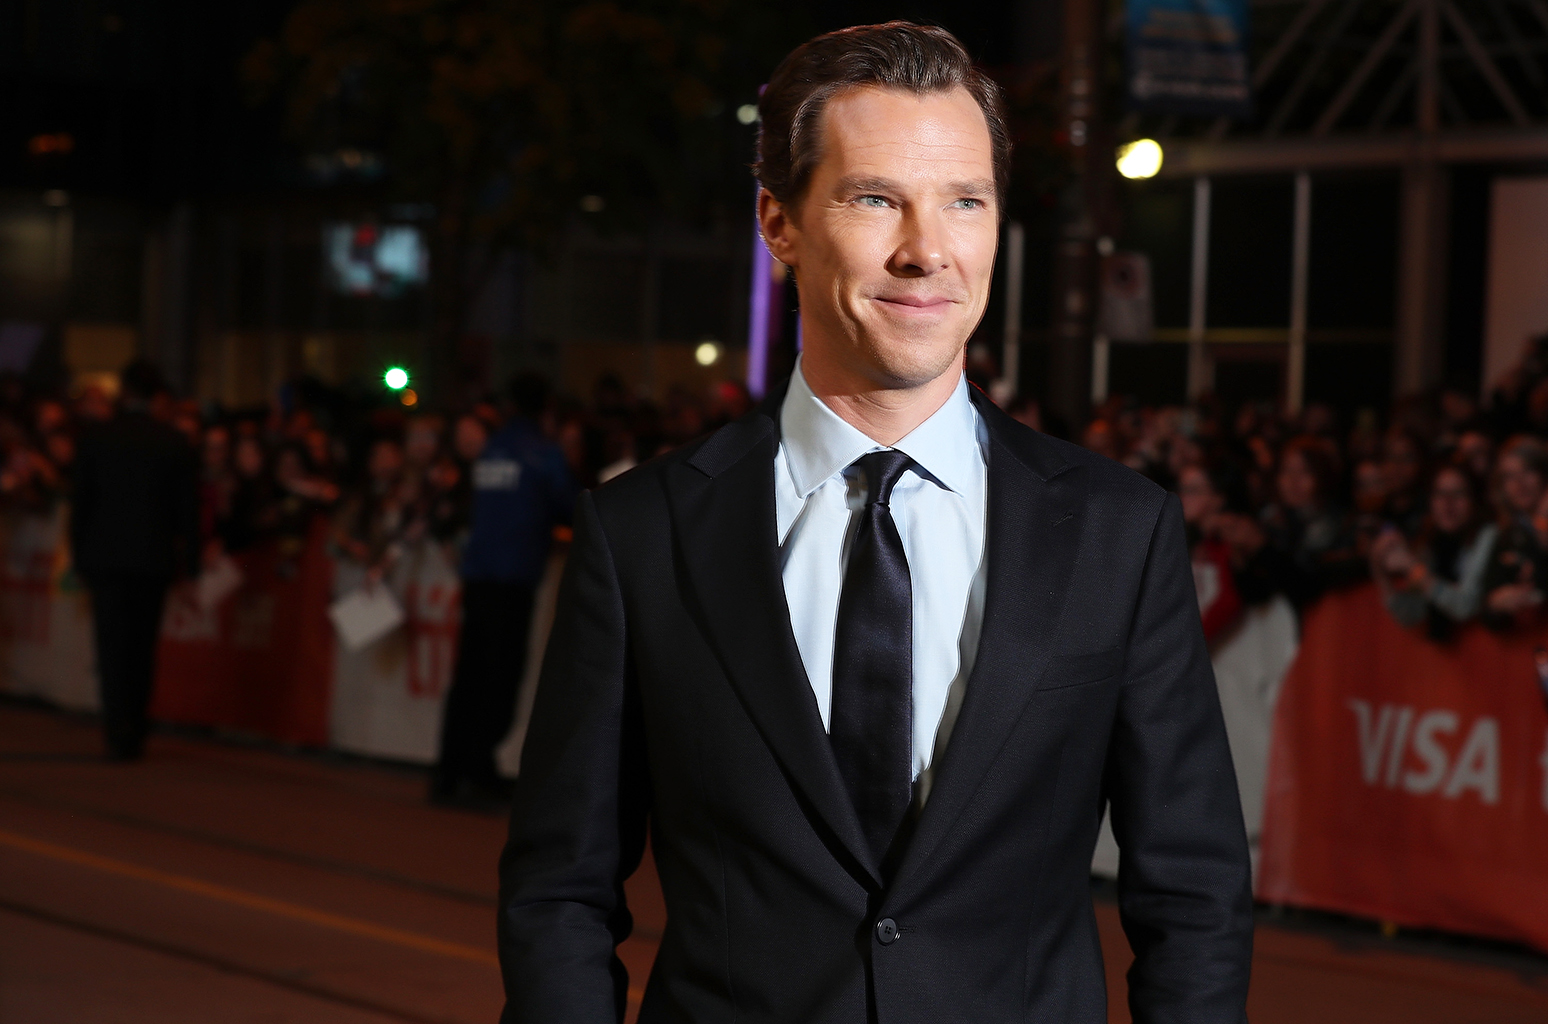 We Know the Name of Your Next S.O. Based on the Male Celebs You Pick Benedict Cumberbatch